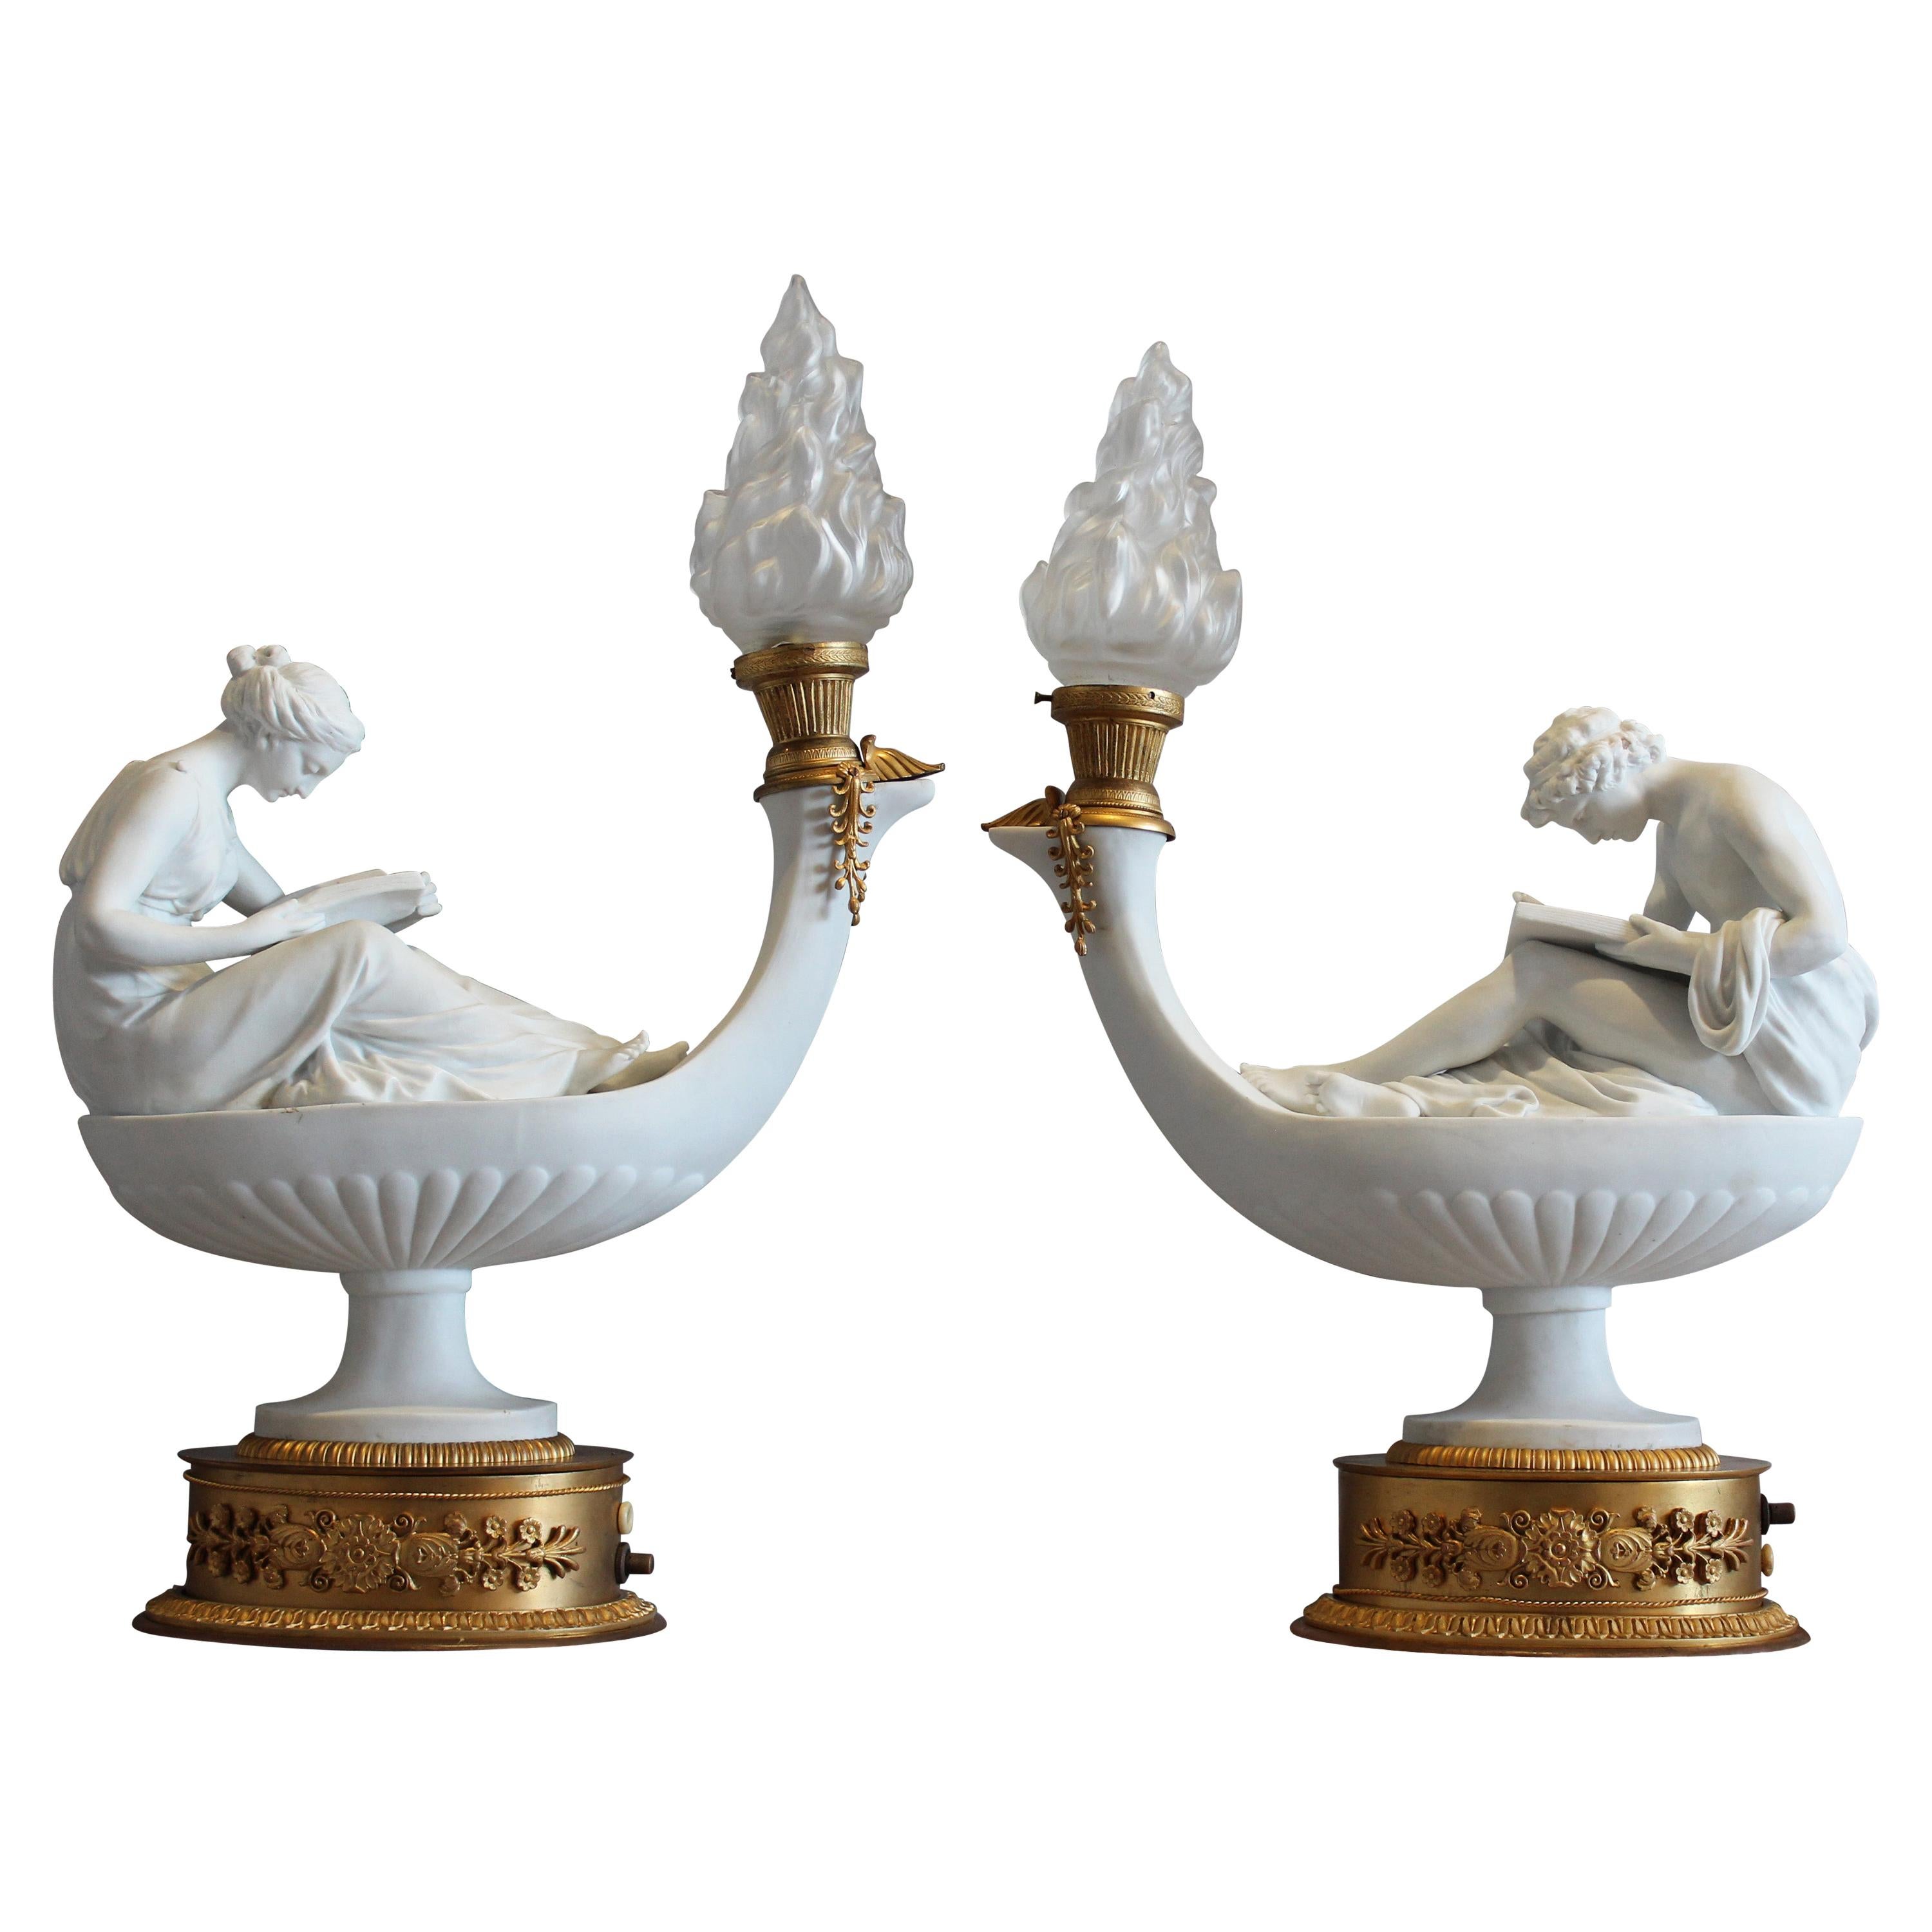 Pair of Gilt Bronze Mounted Bisque Figures after Boizot